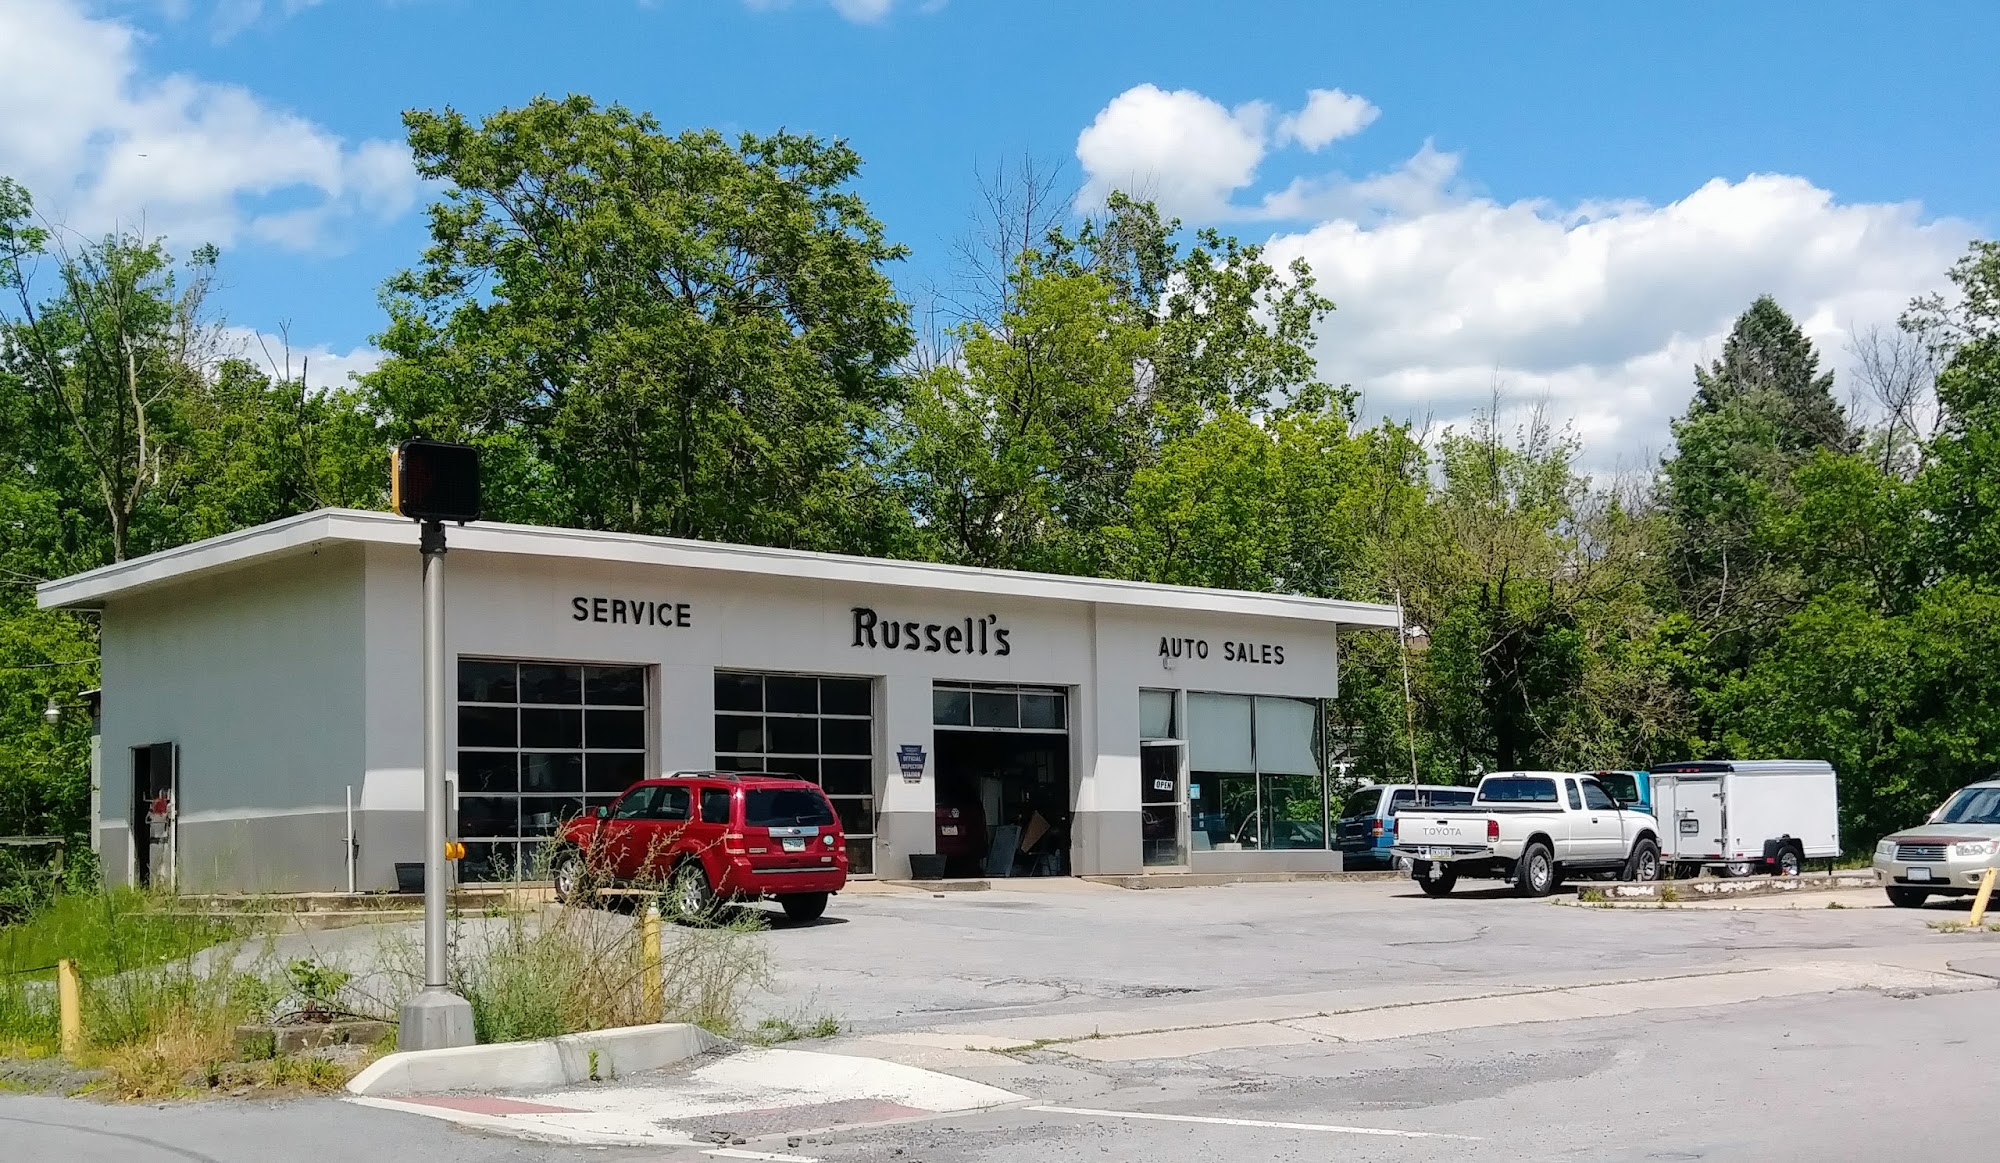 Russell's Auto Repair